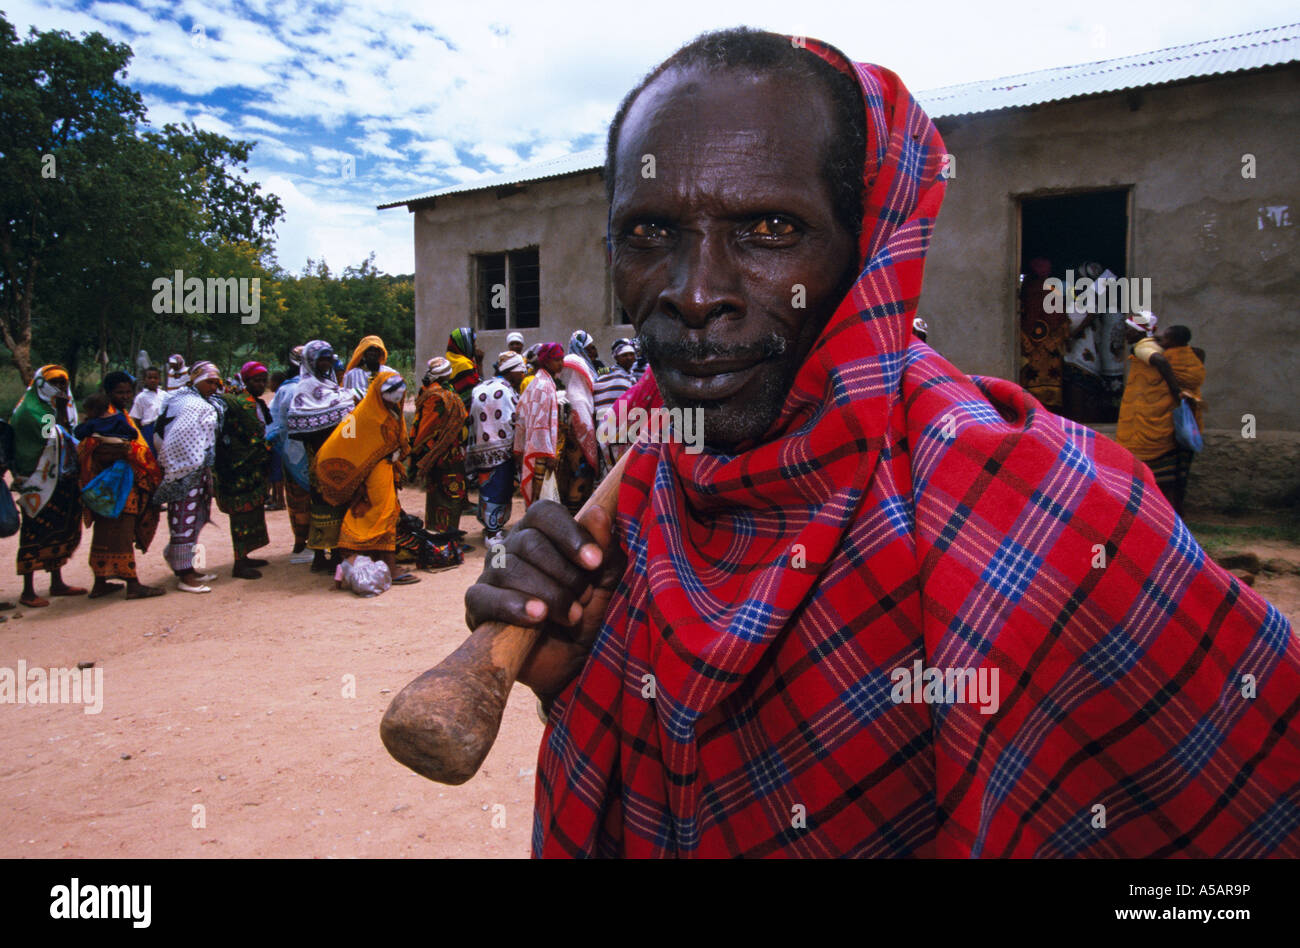 Portrait of man, villagers queueing in background, Nangwa, Tanzania, Africa Stock Photo